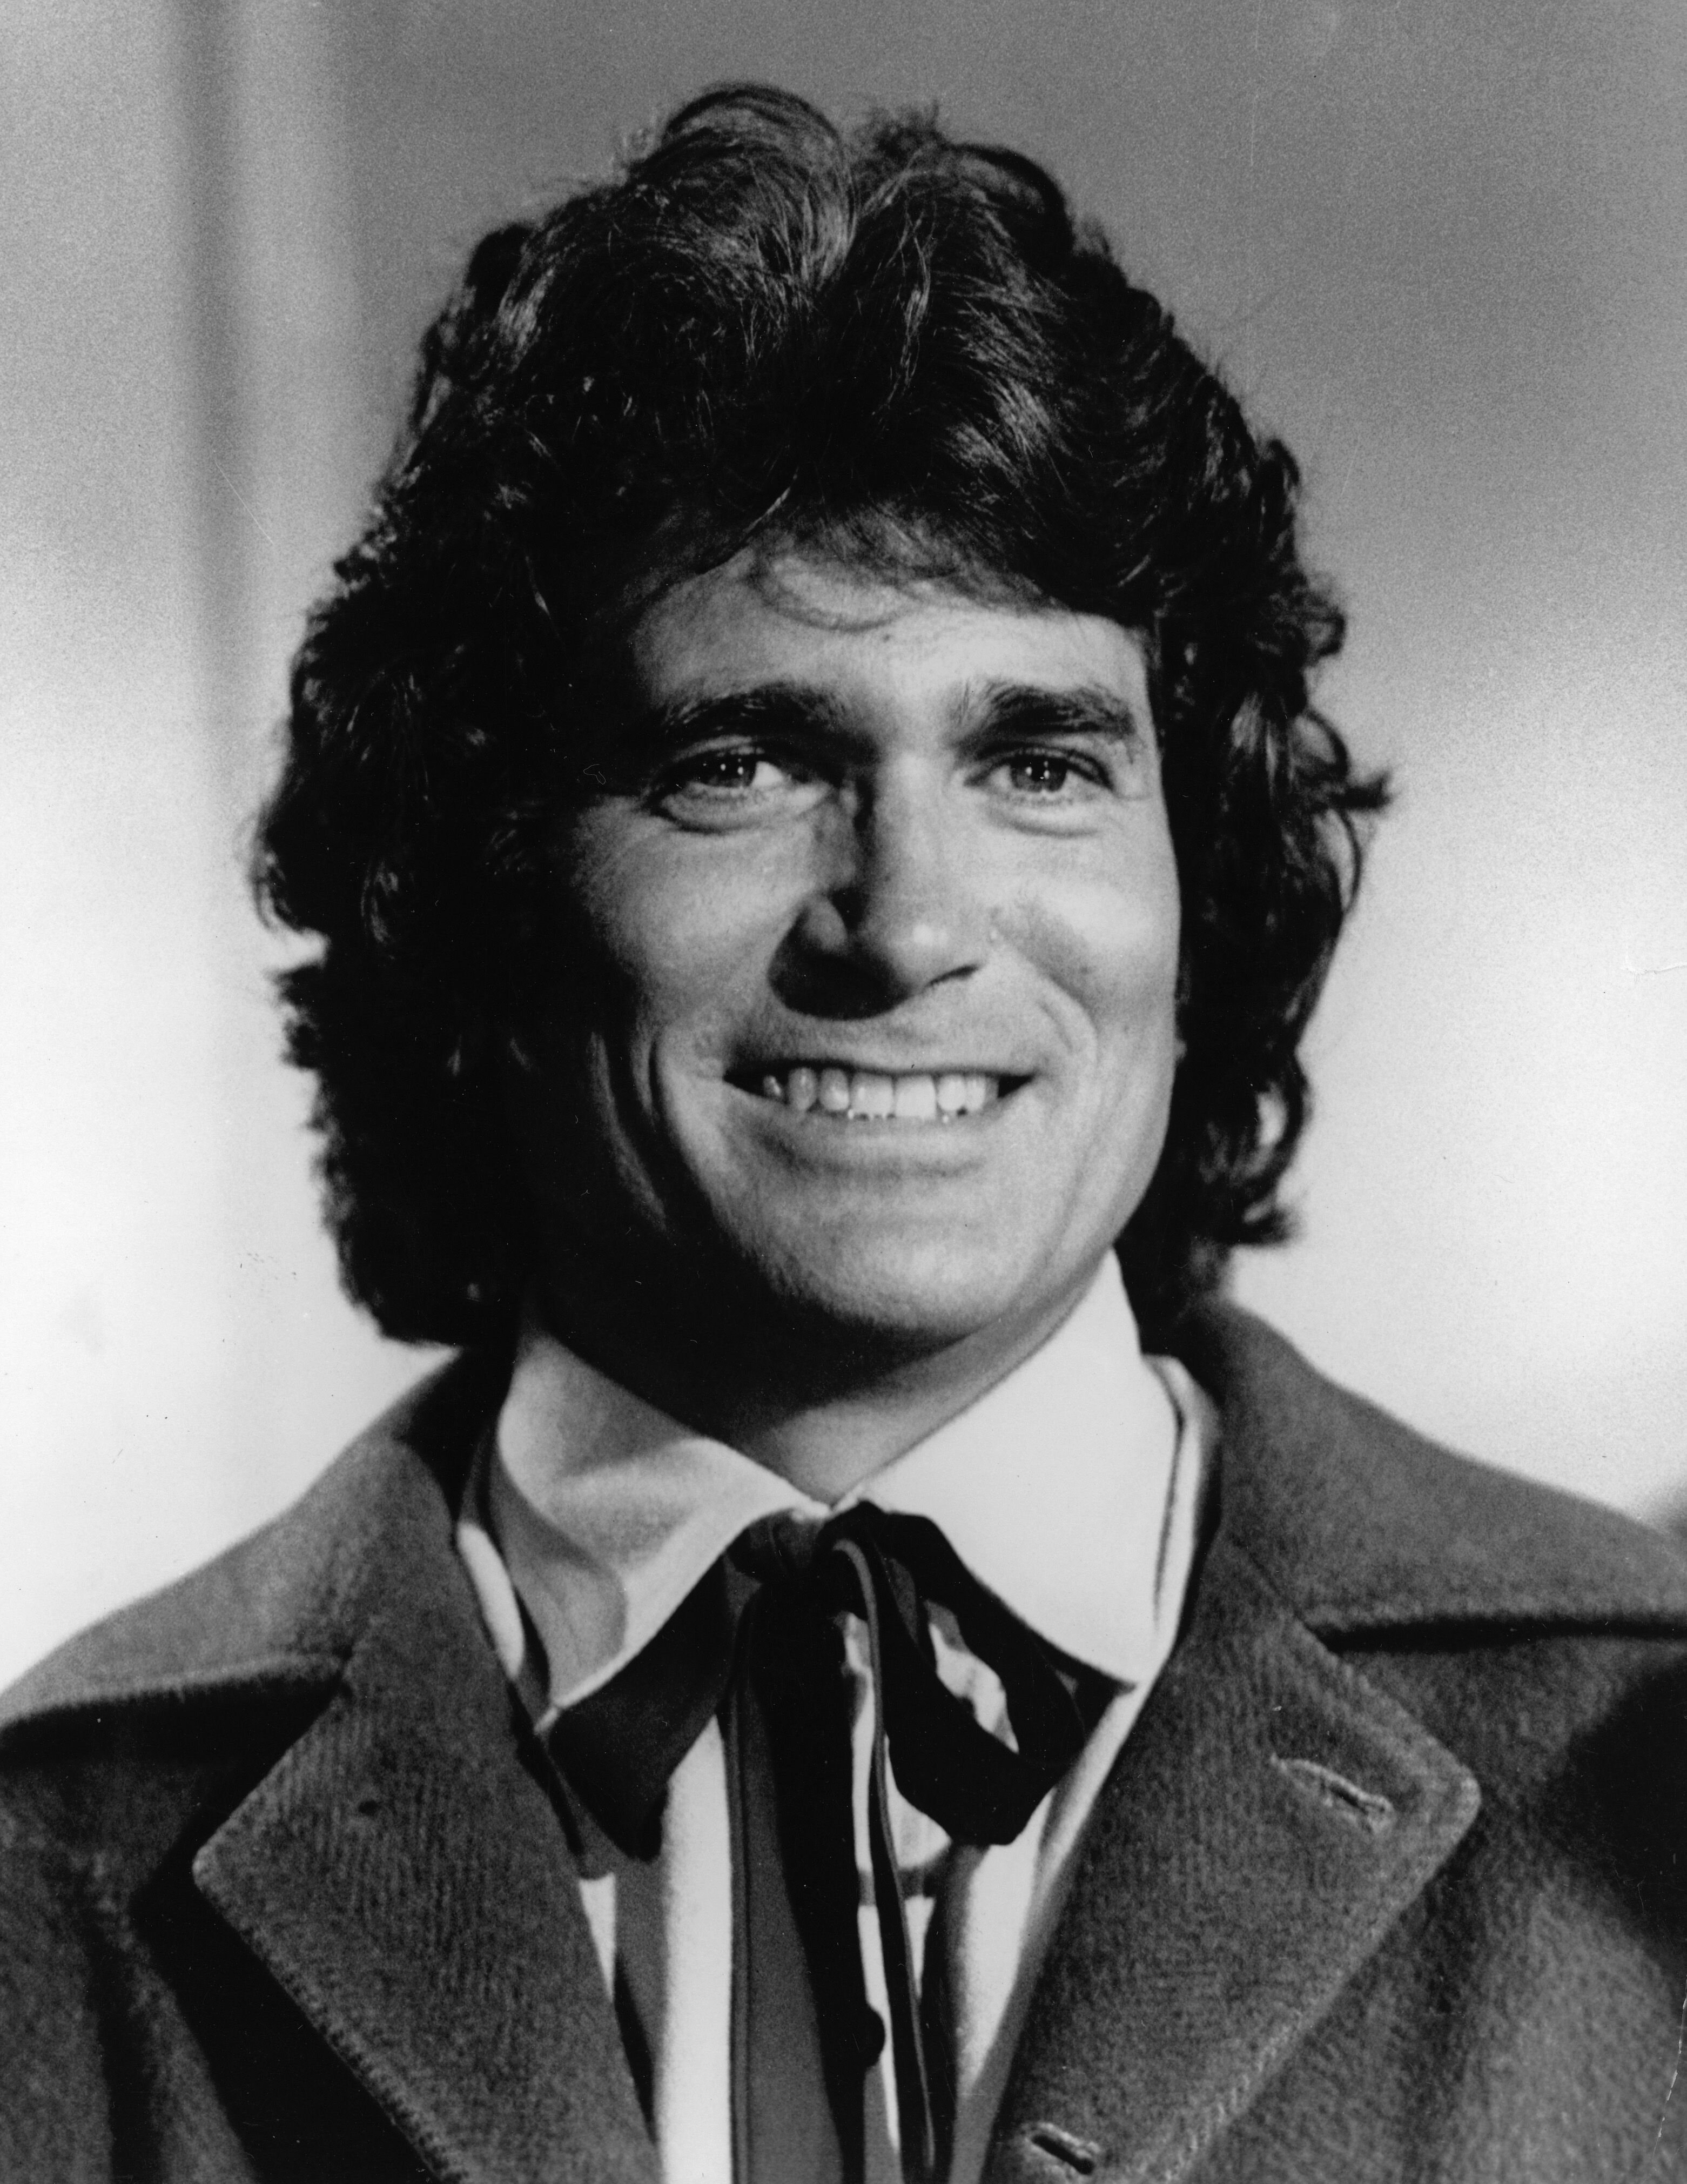 Michael Landon in costume for "The Little House on the Prairie." | Source: Getty Images